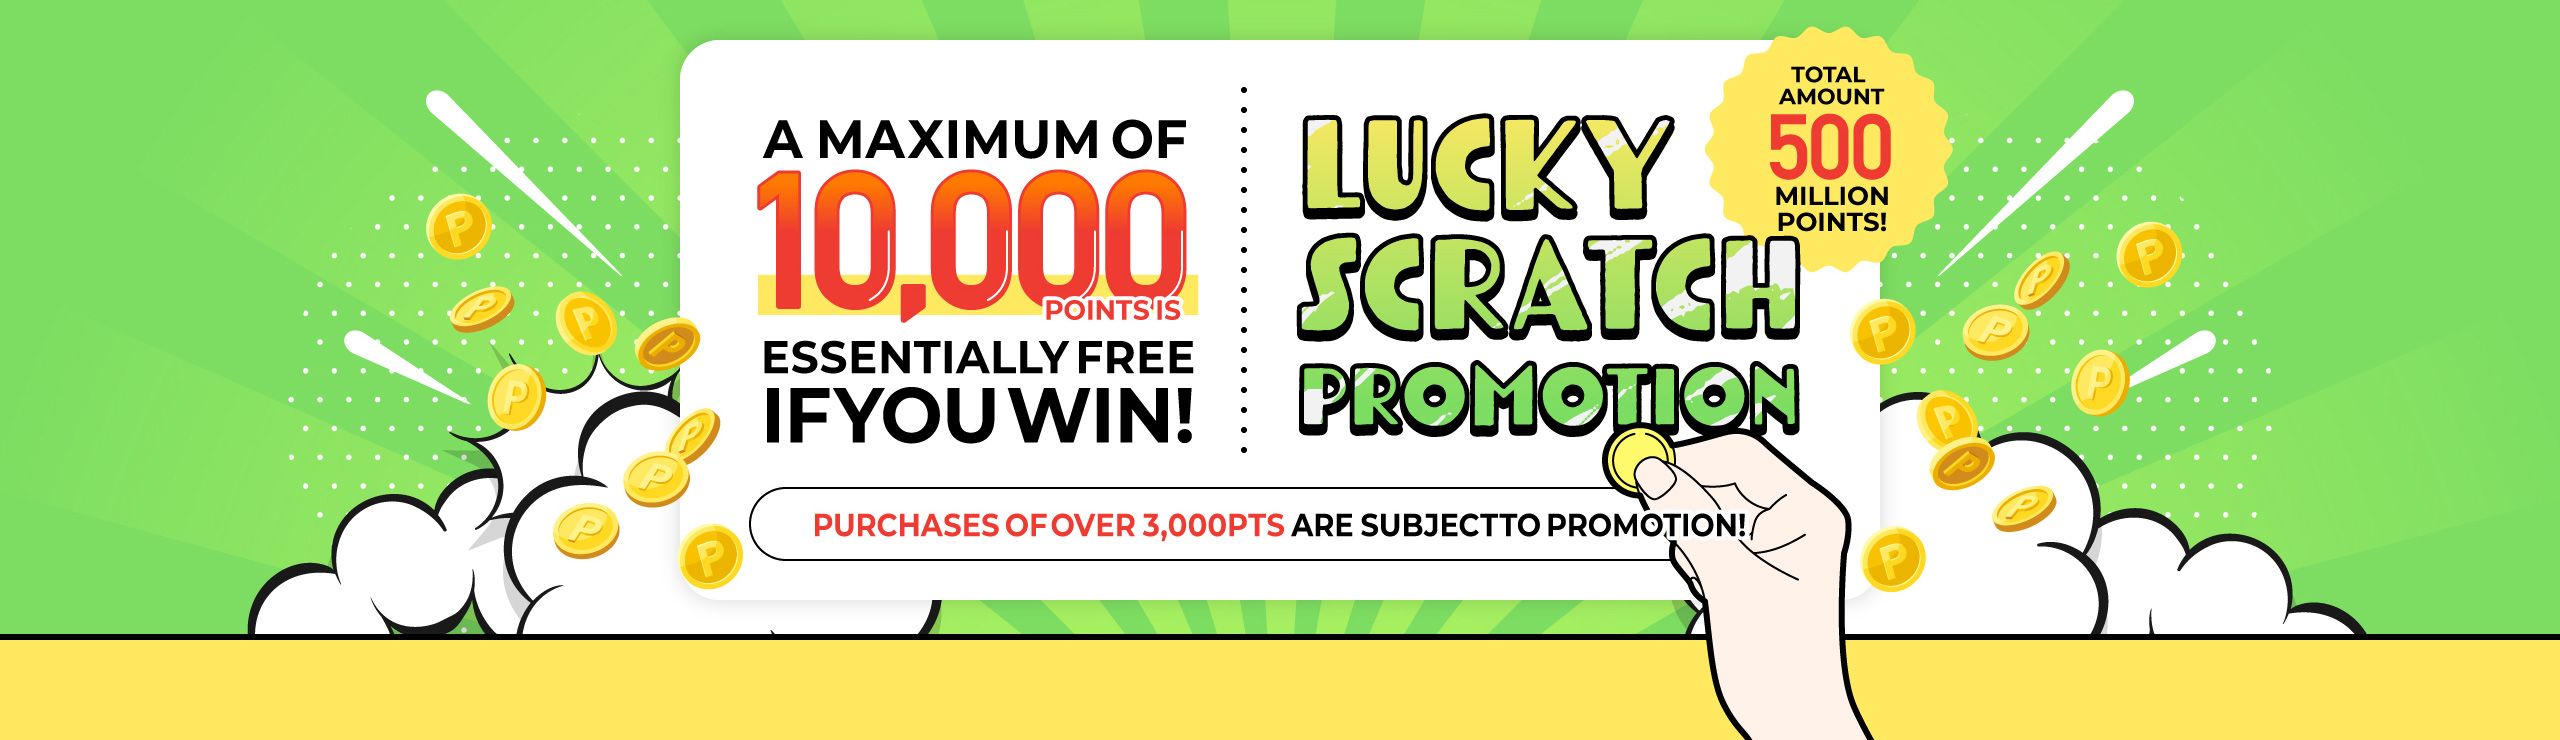 Total amount 5million points! A maximum of 10,000 points is essentially free if you win! Lucky Scratch Promotion Period 1/10 - 1/16 Purchases of over 3,000pts are subject to promotion!